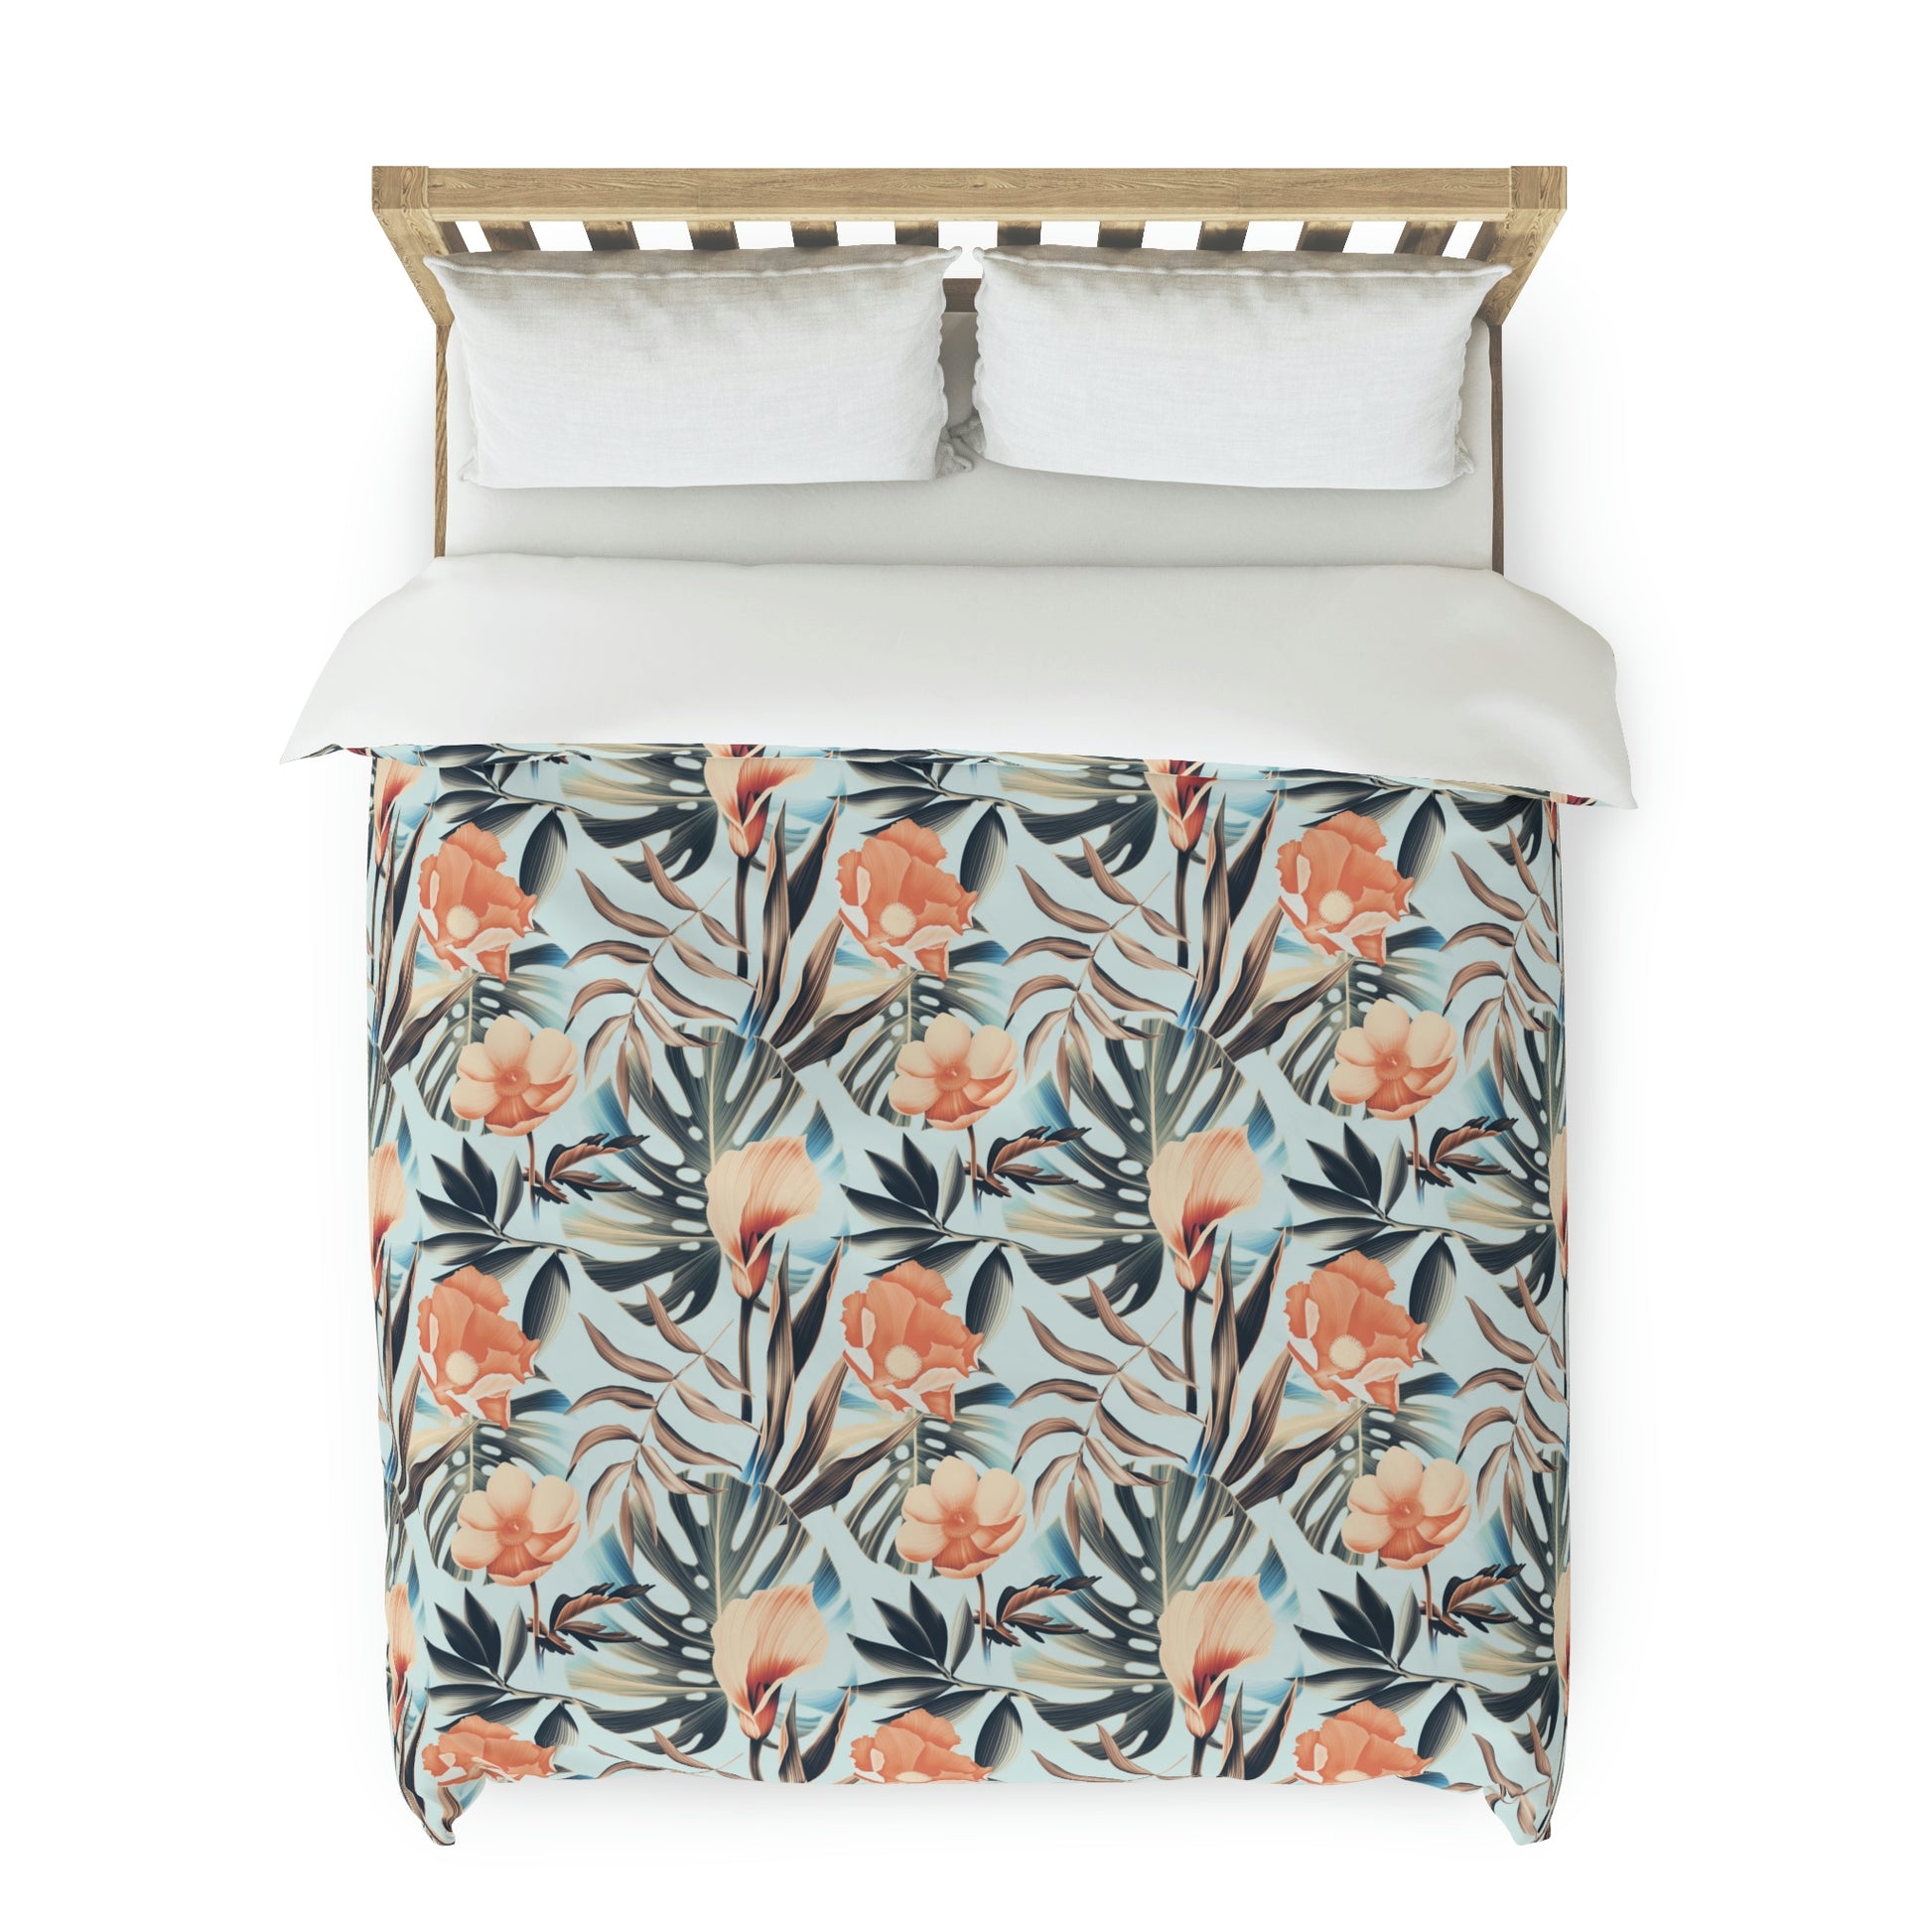 Palm Beach Floral Duvet Cover lying on a bed, microfiber floral duvet cover bedroom accent